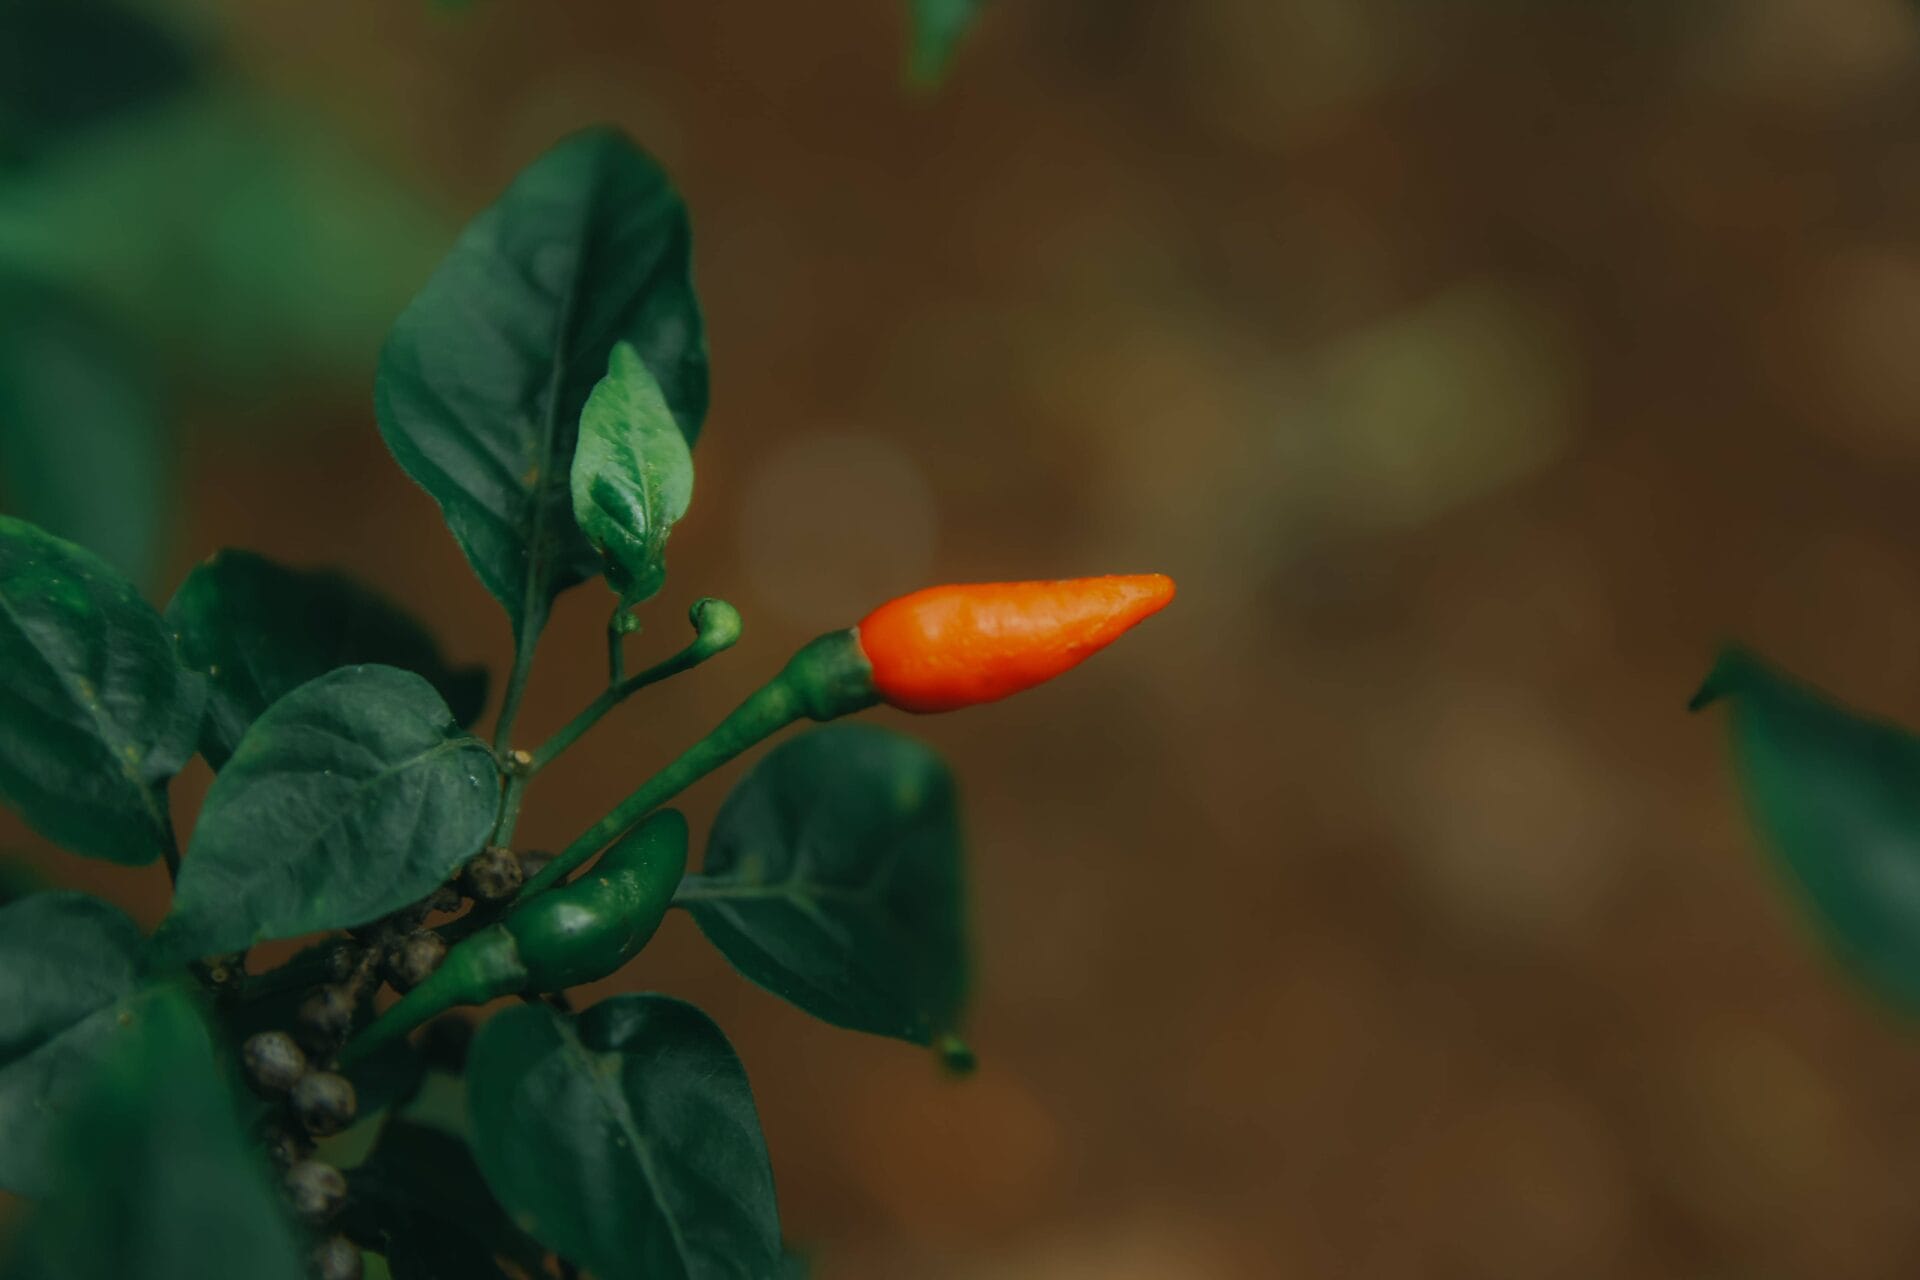 How to grow hot peppers